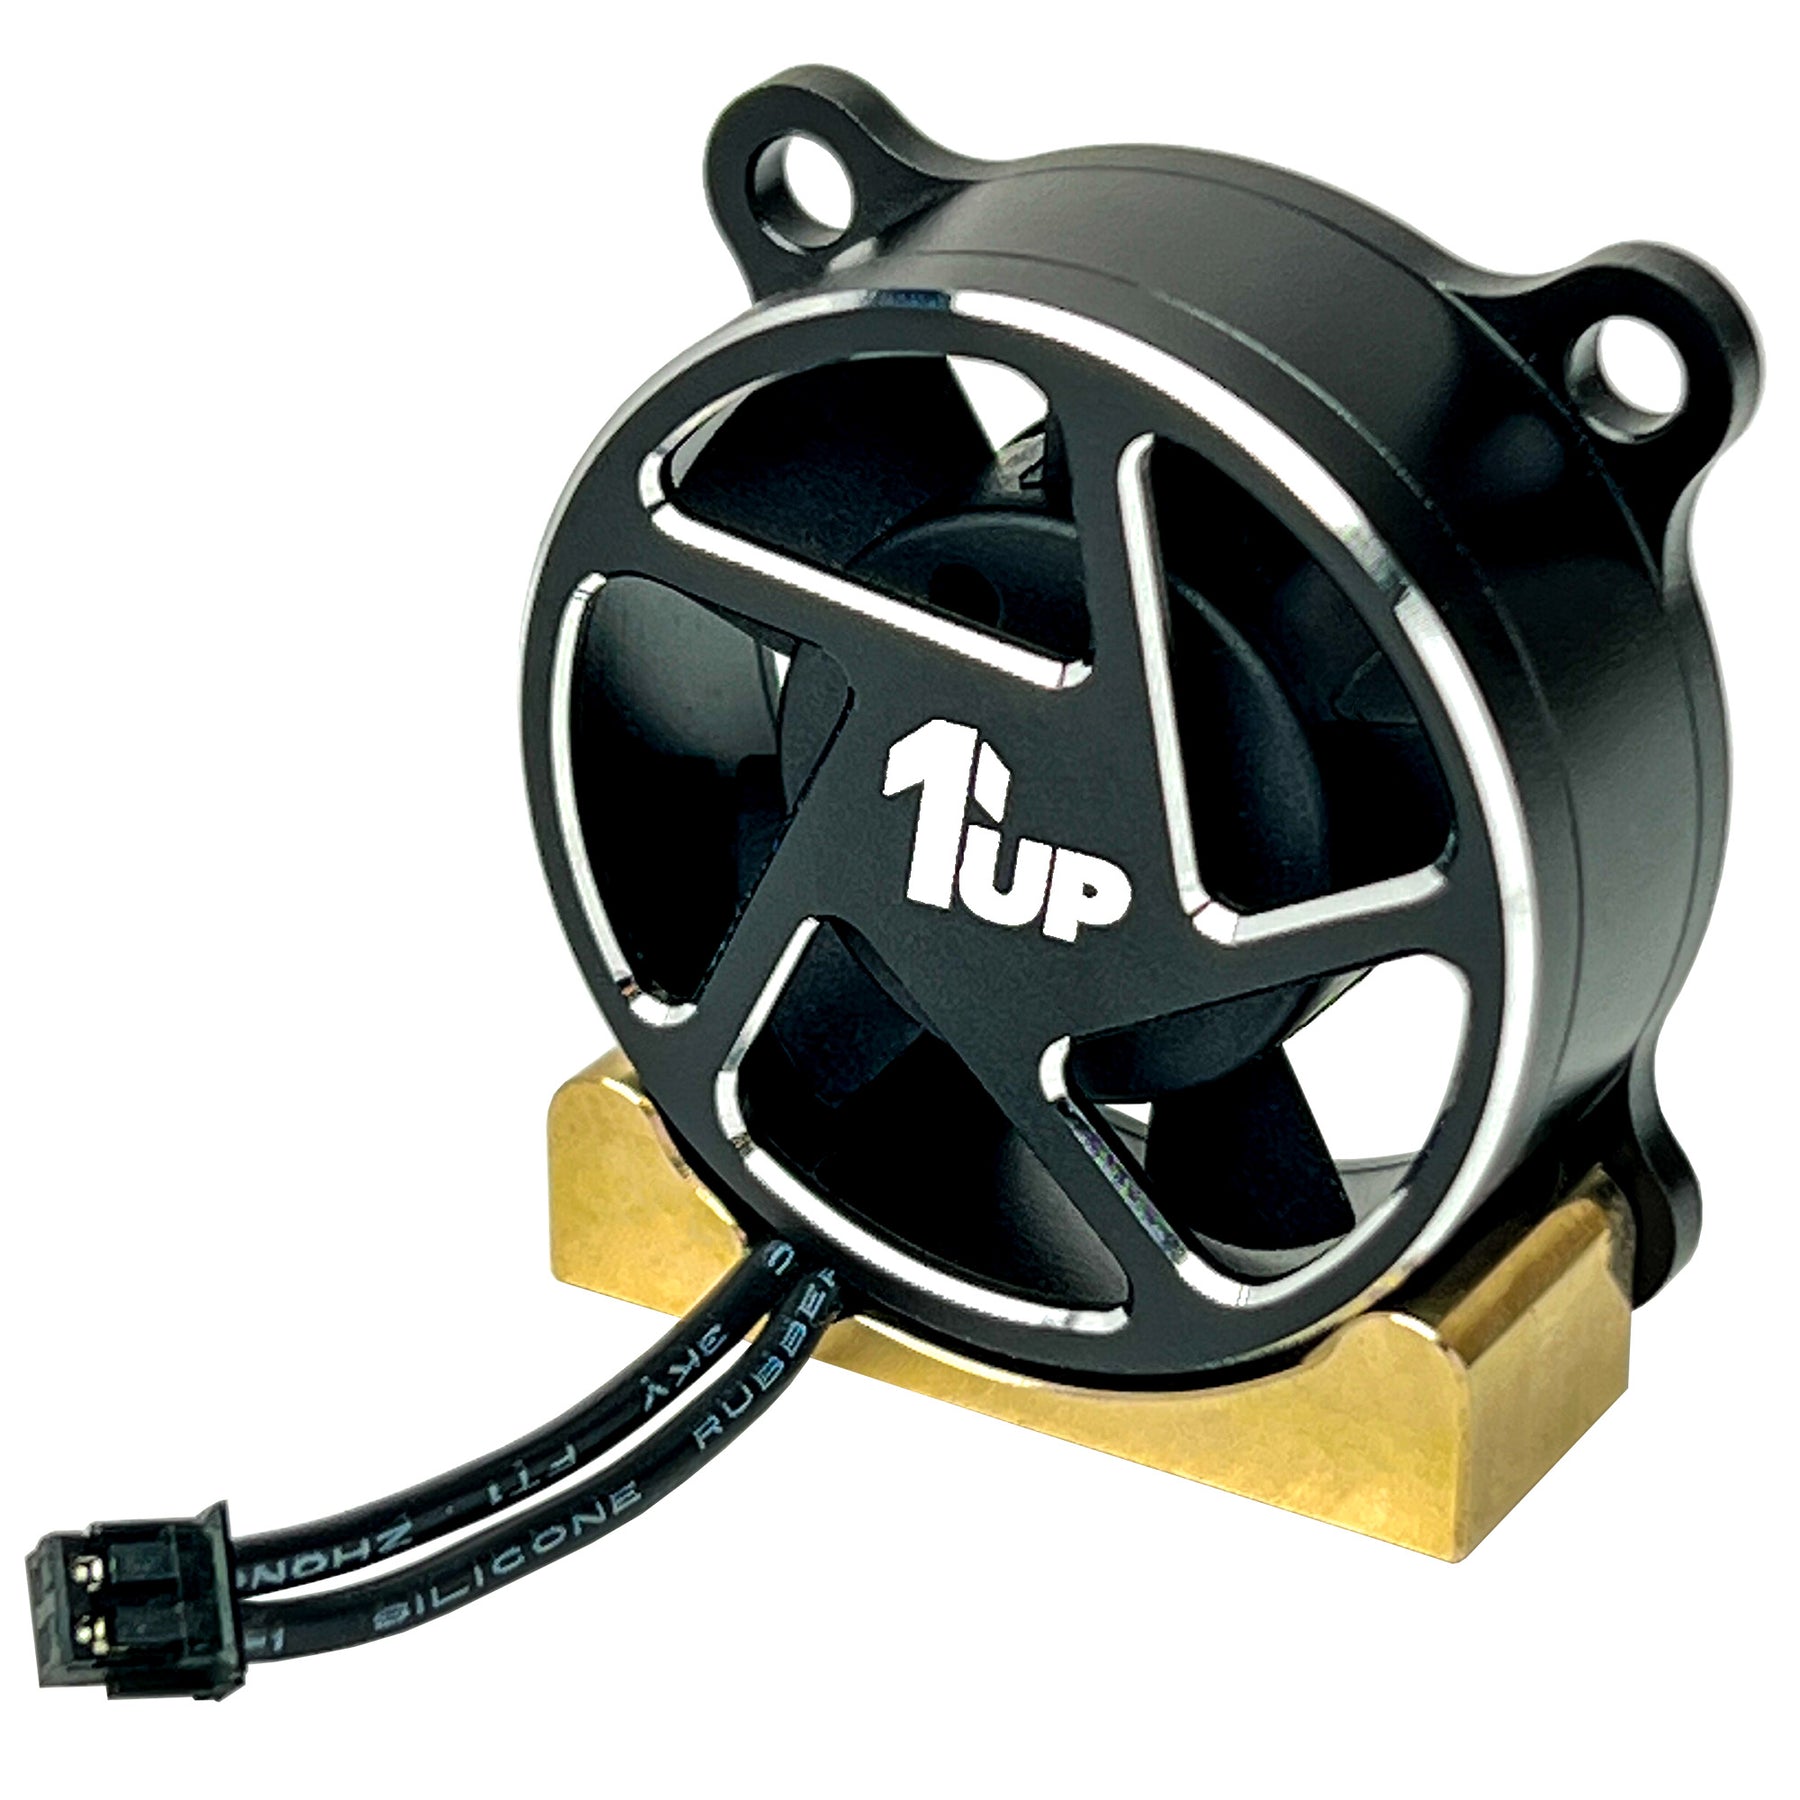 1up Racing Chassis Mounts for UltraLite High-Speed Fan